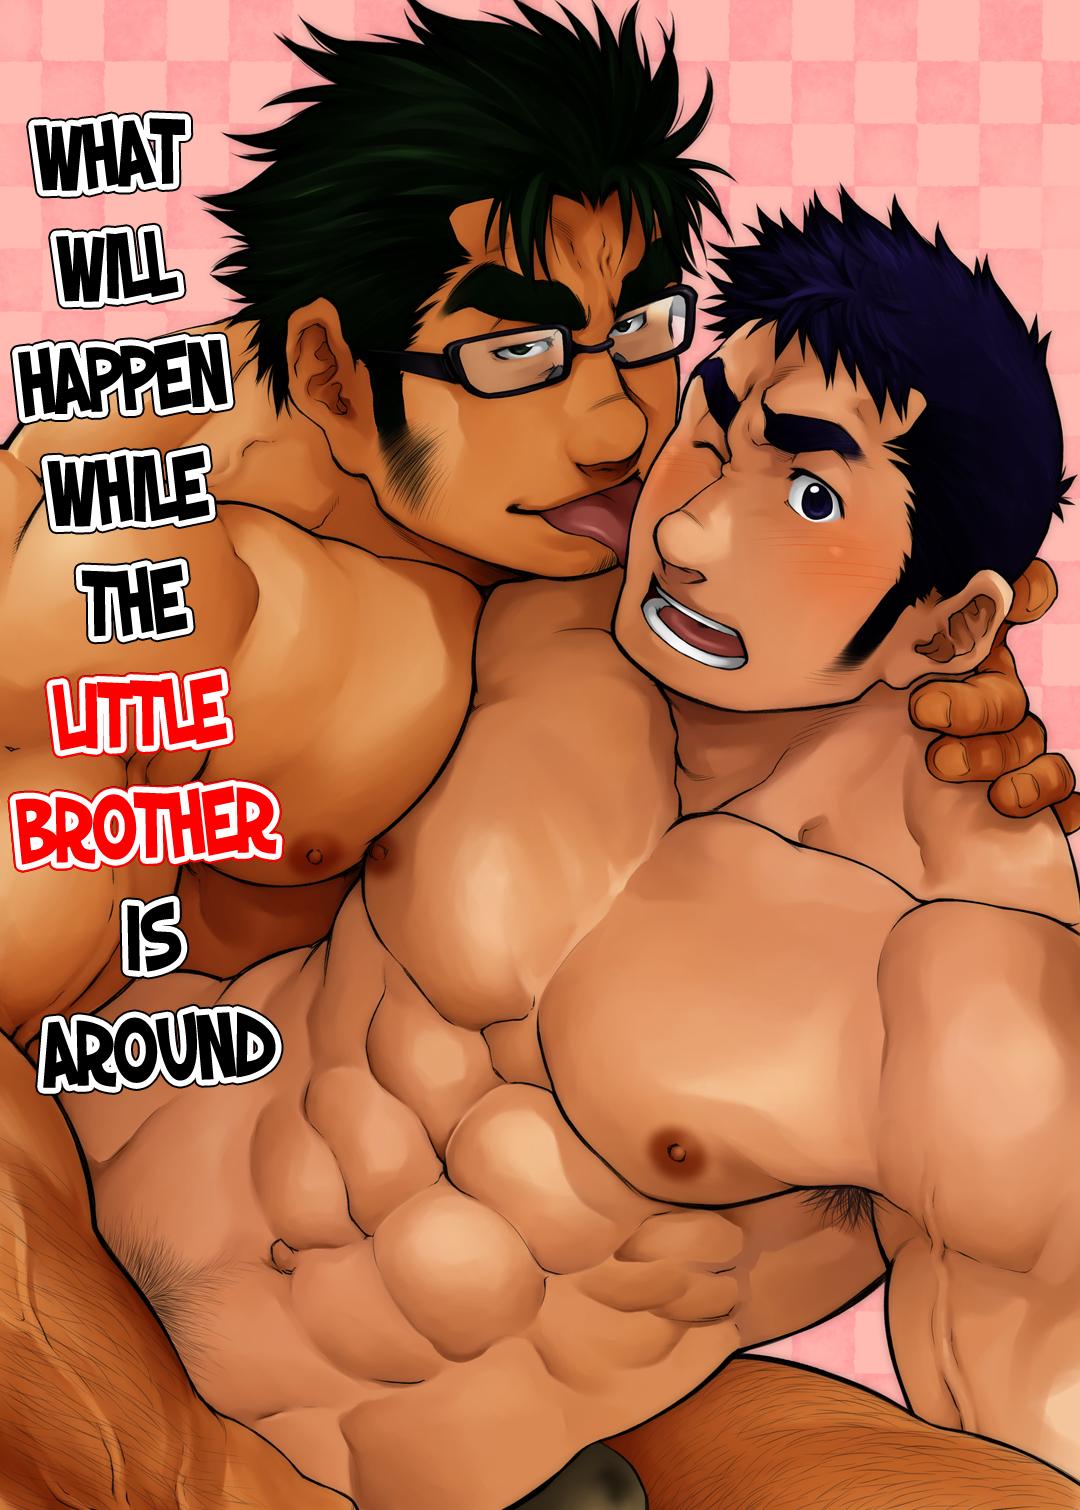 Otouto no Inu Ma ni Nantoyara | What Will Happen While The Little Brother is Around 1